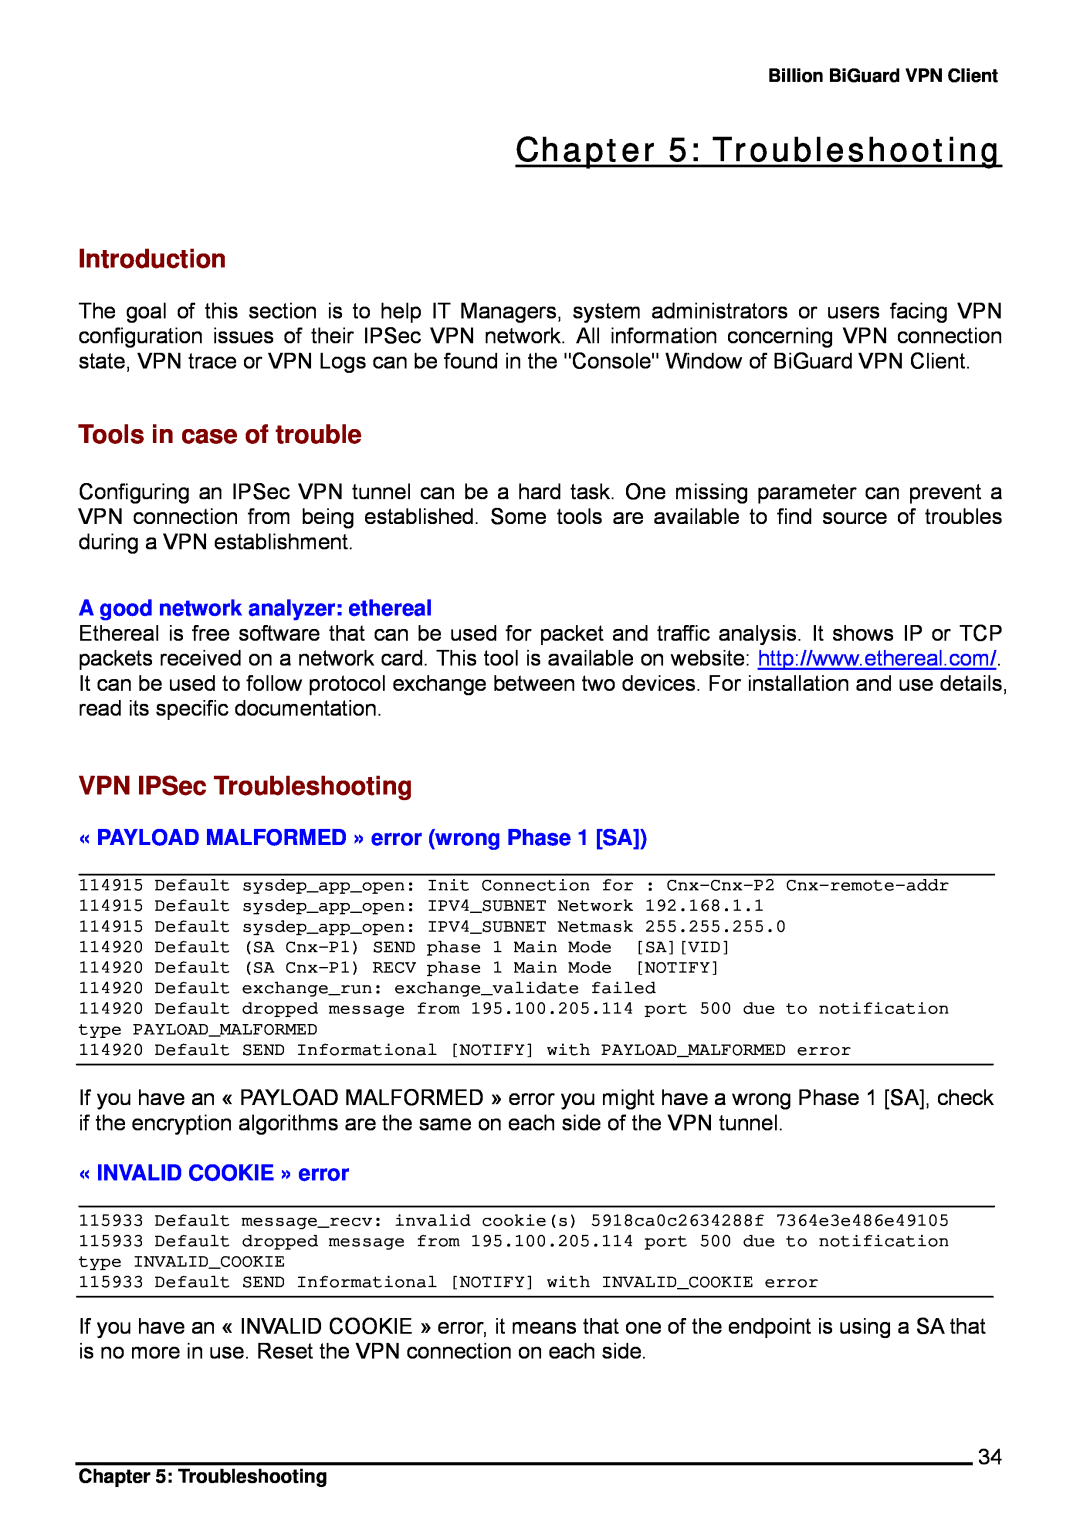 Billion Electric Company CO1 user manual Introduction, Tools in case of trouble, VPN IPSec Troubleshooting 